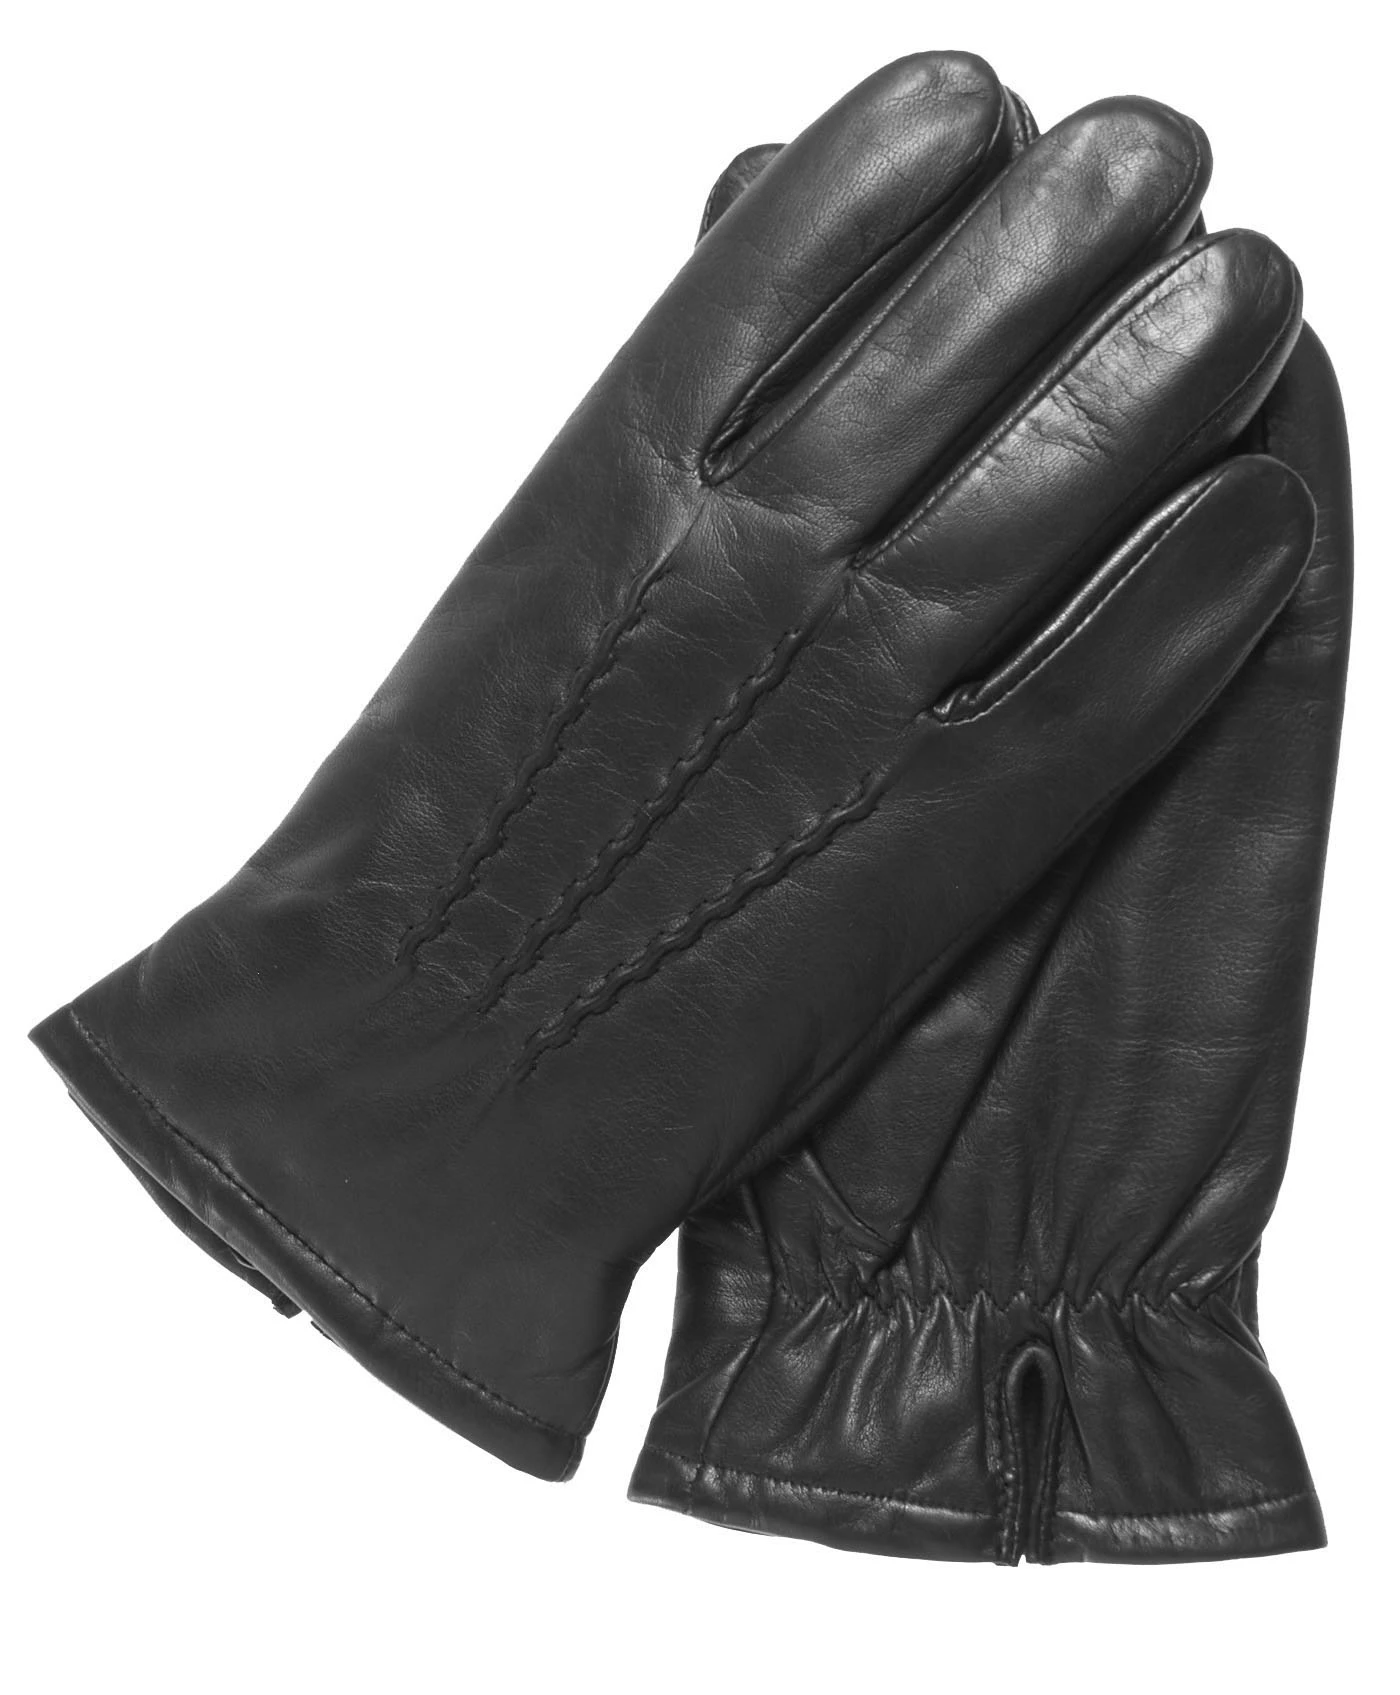 2021 brown leather driving gloves with & without lining perfect grip on steering